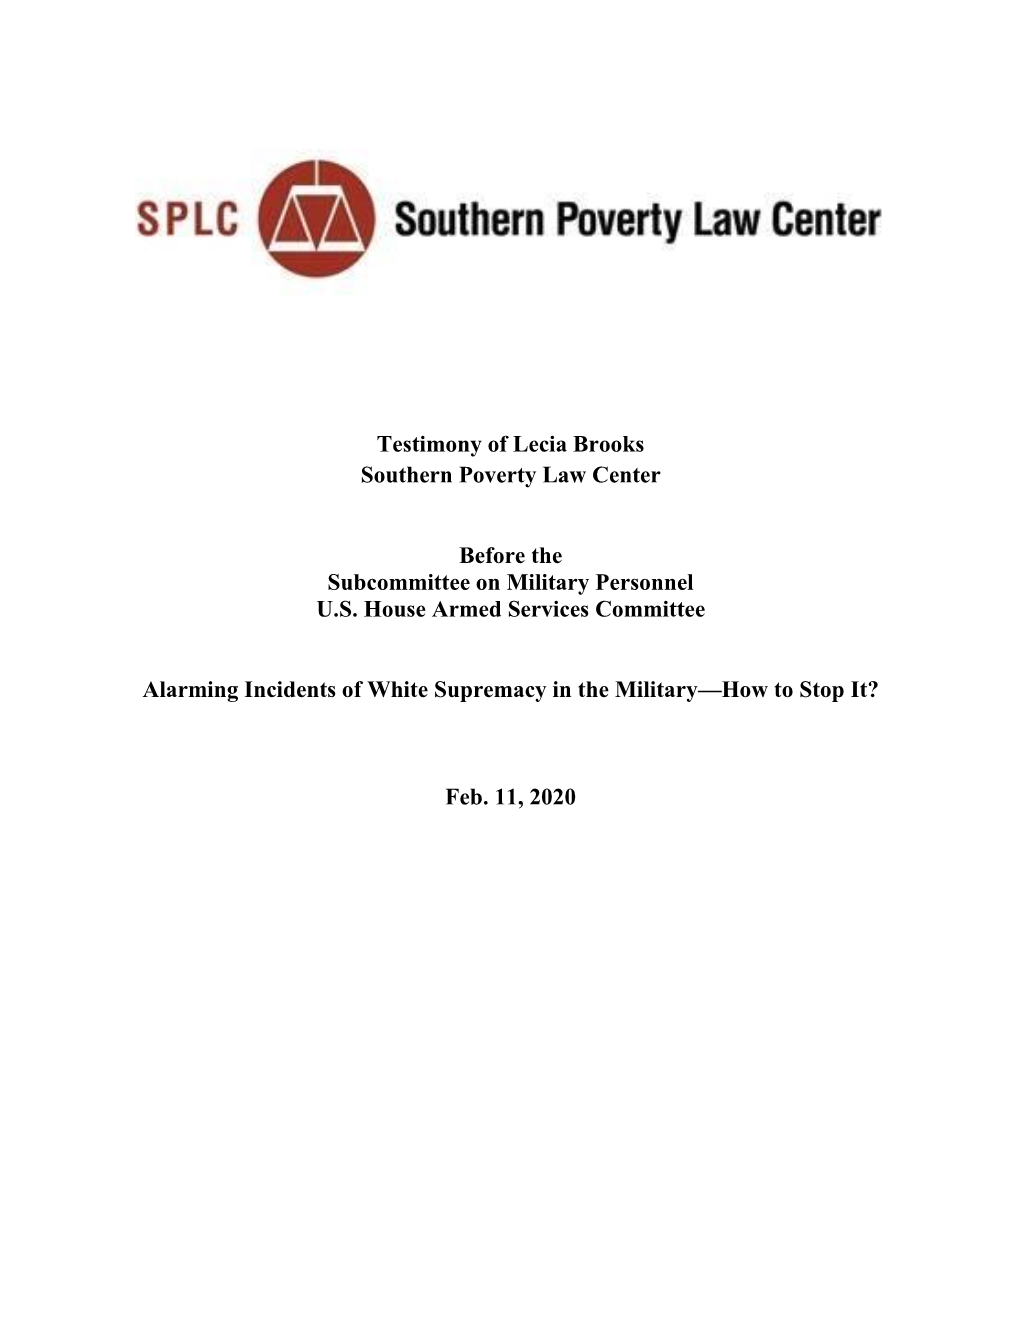 Testimony of Lecia Brooks Southern Poverty Law Center Before The